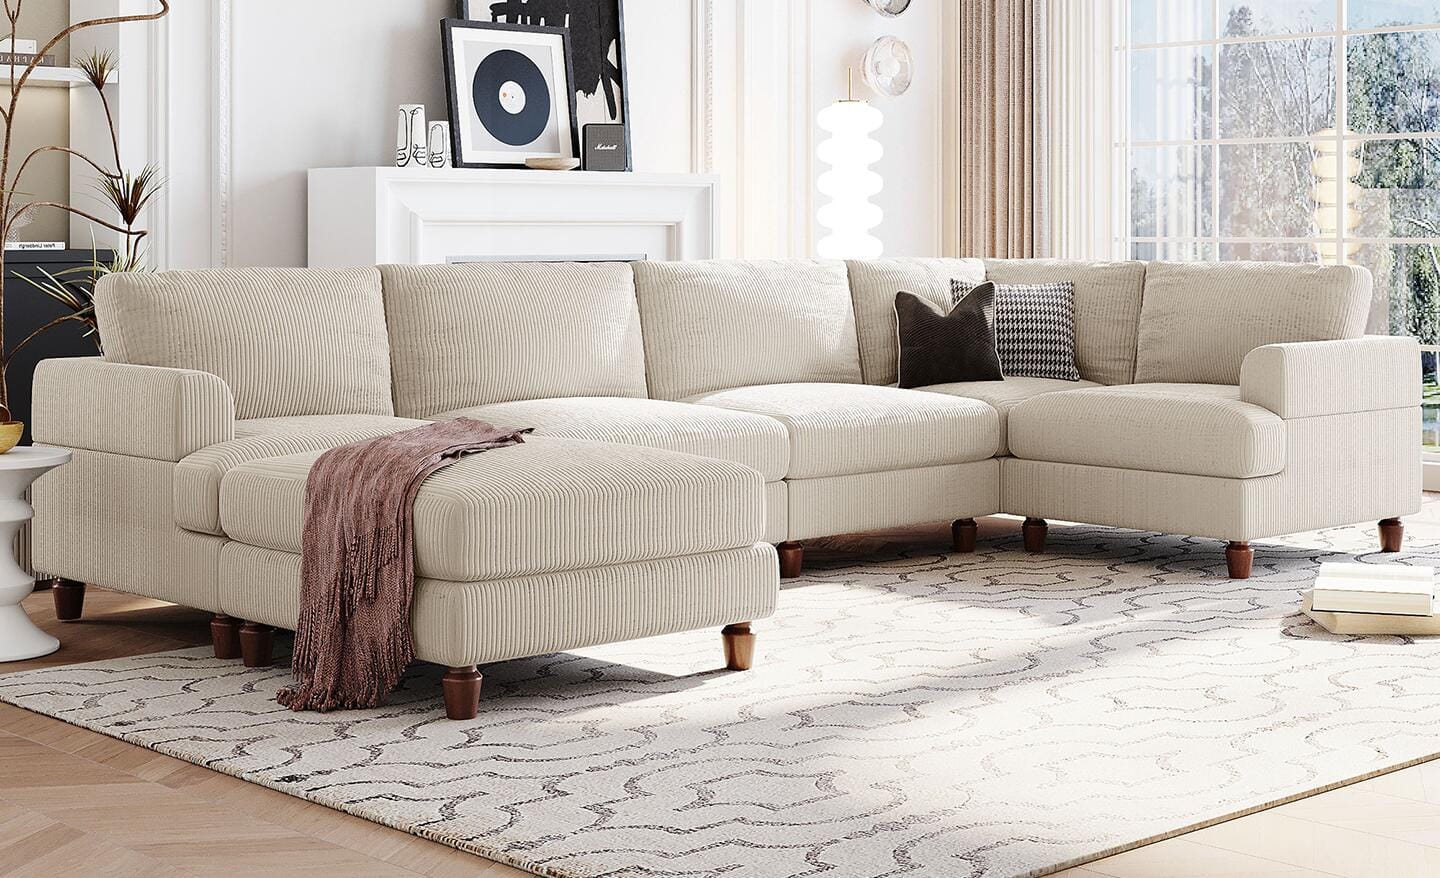 A comfy sectional placed in a living room.